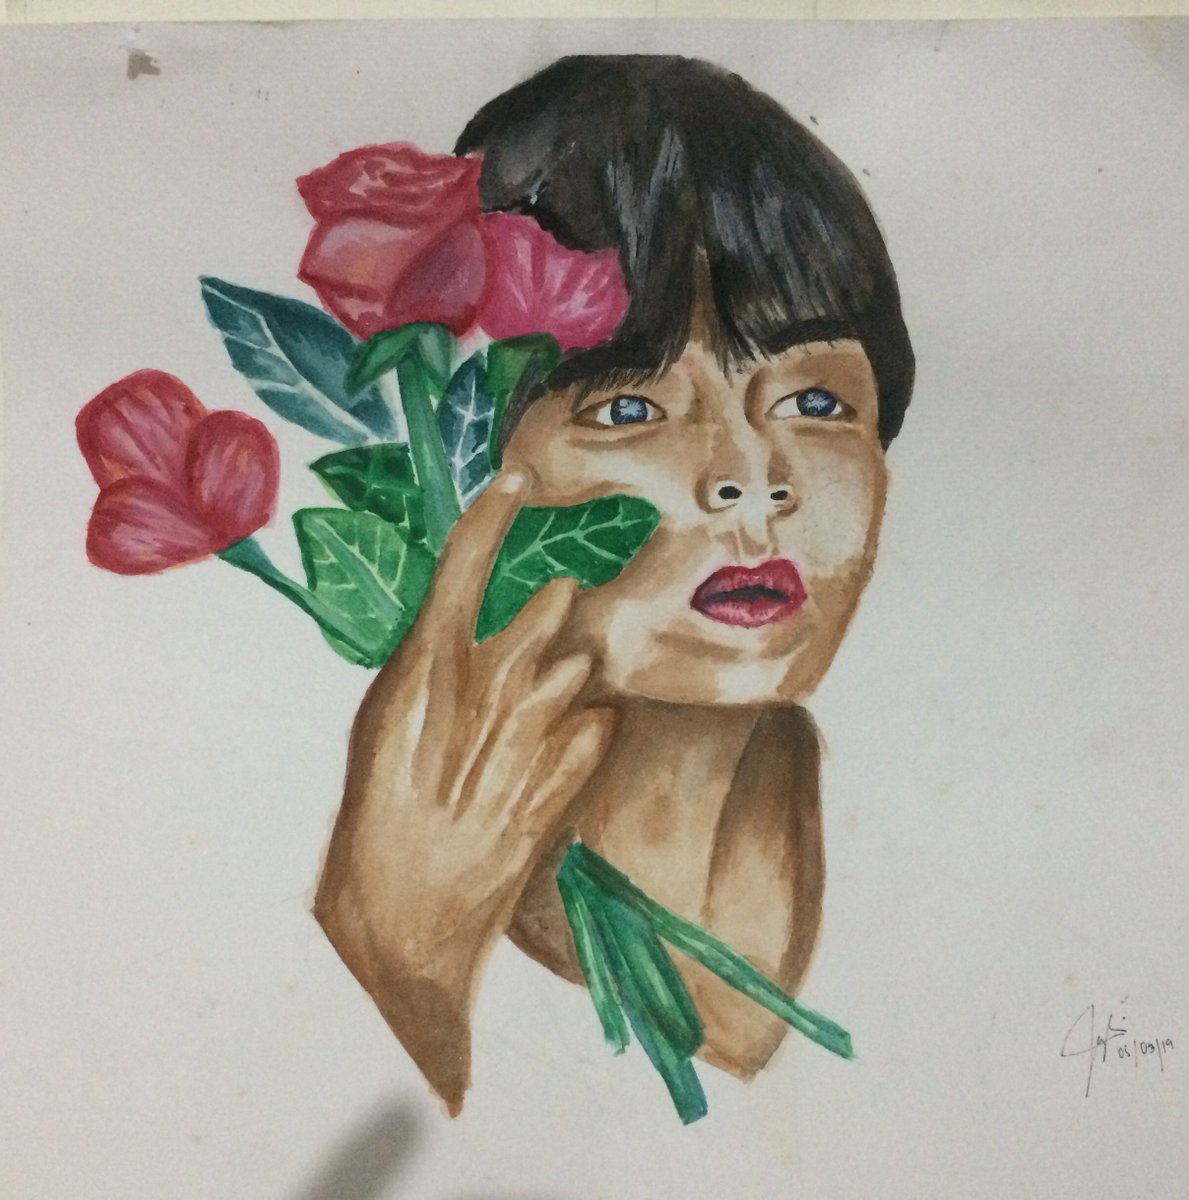 MAY 03 2019*my first watercolor portrait and its VERY VERY BAD